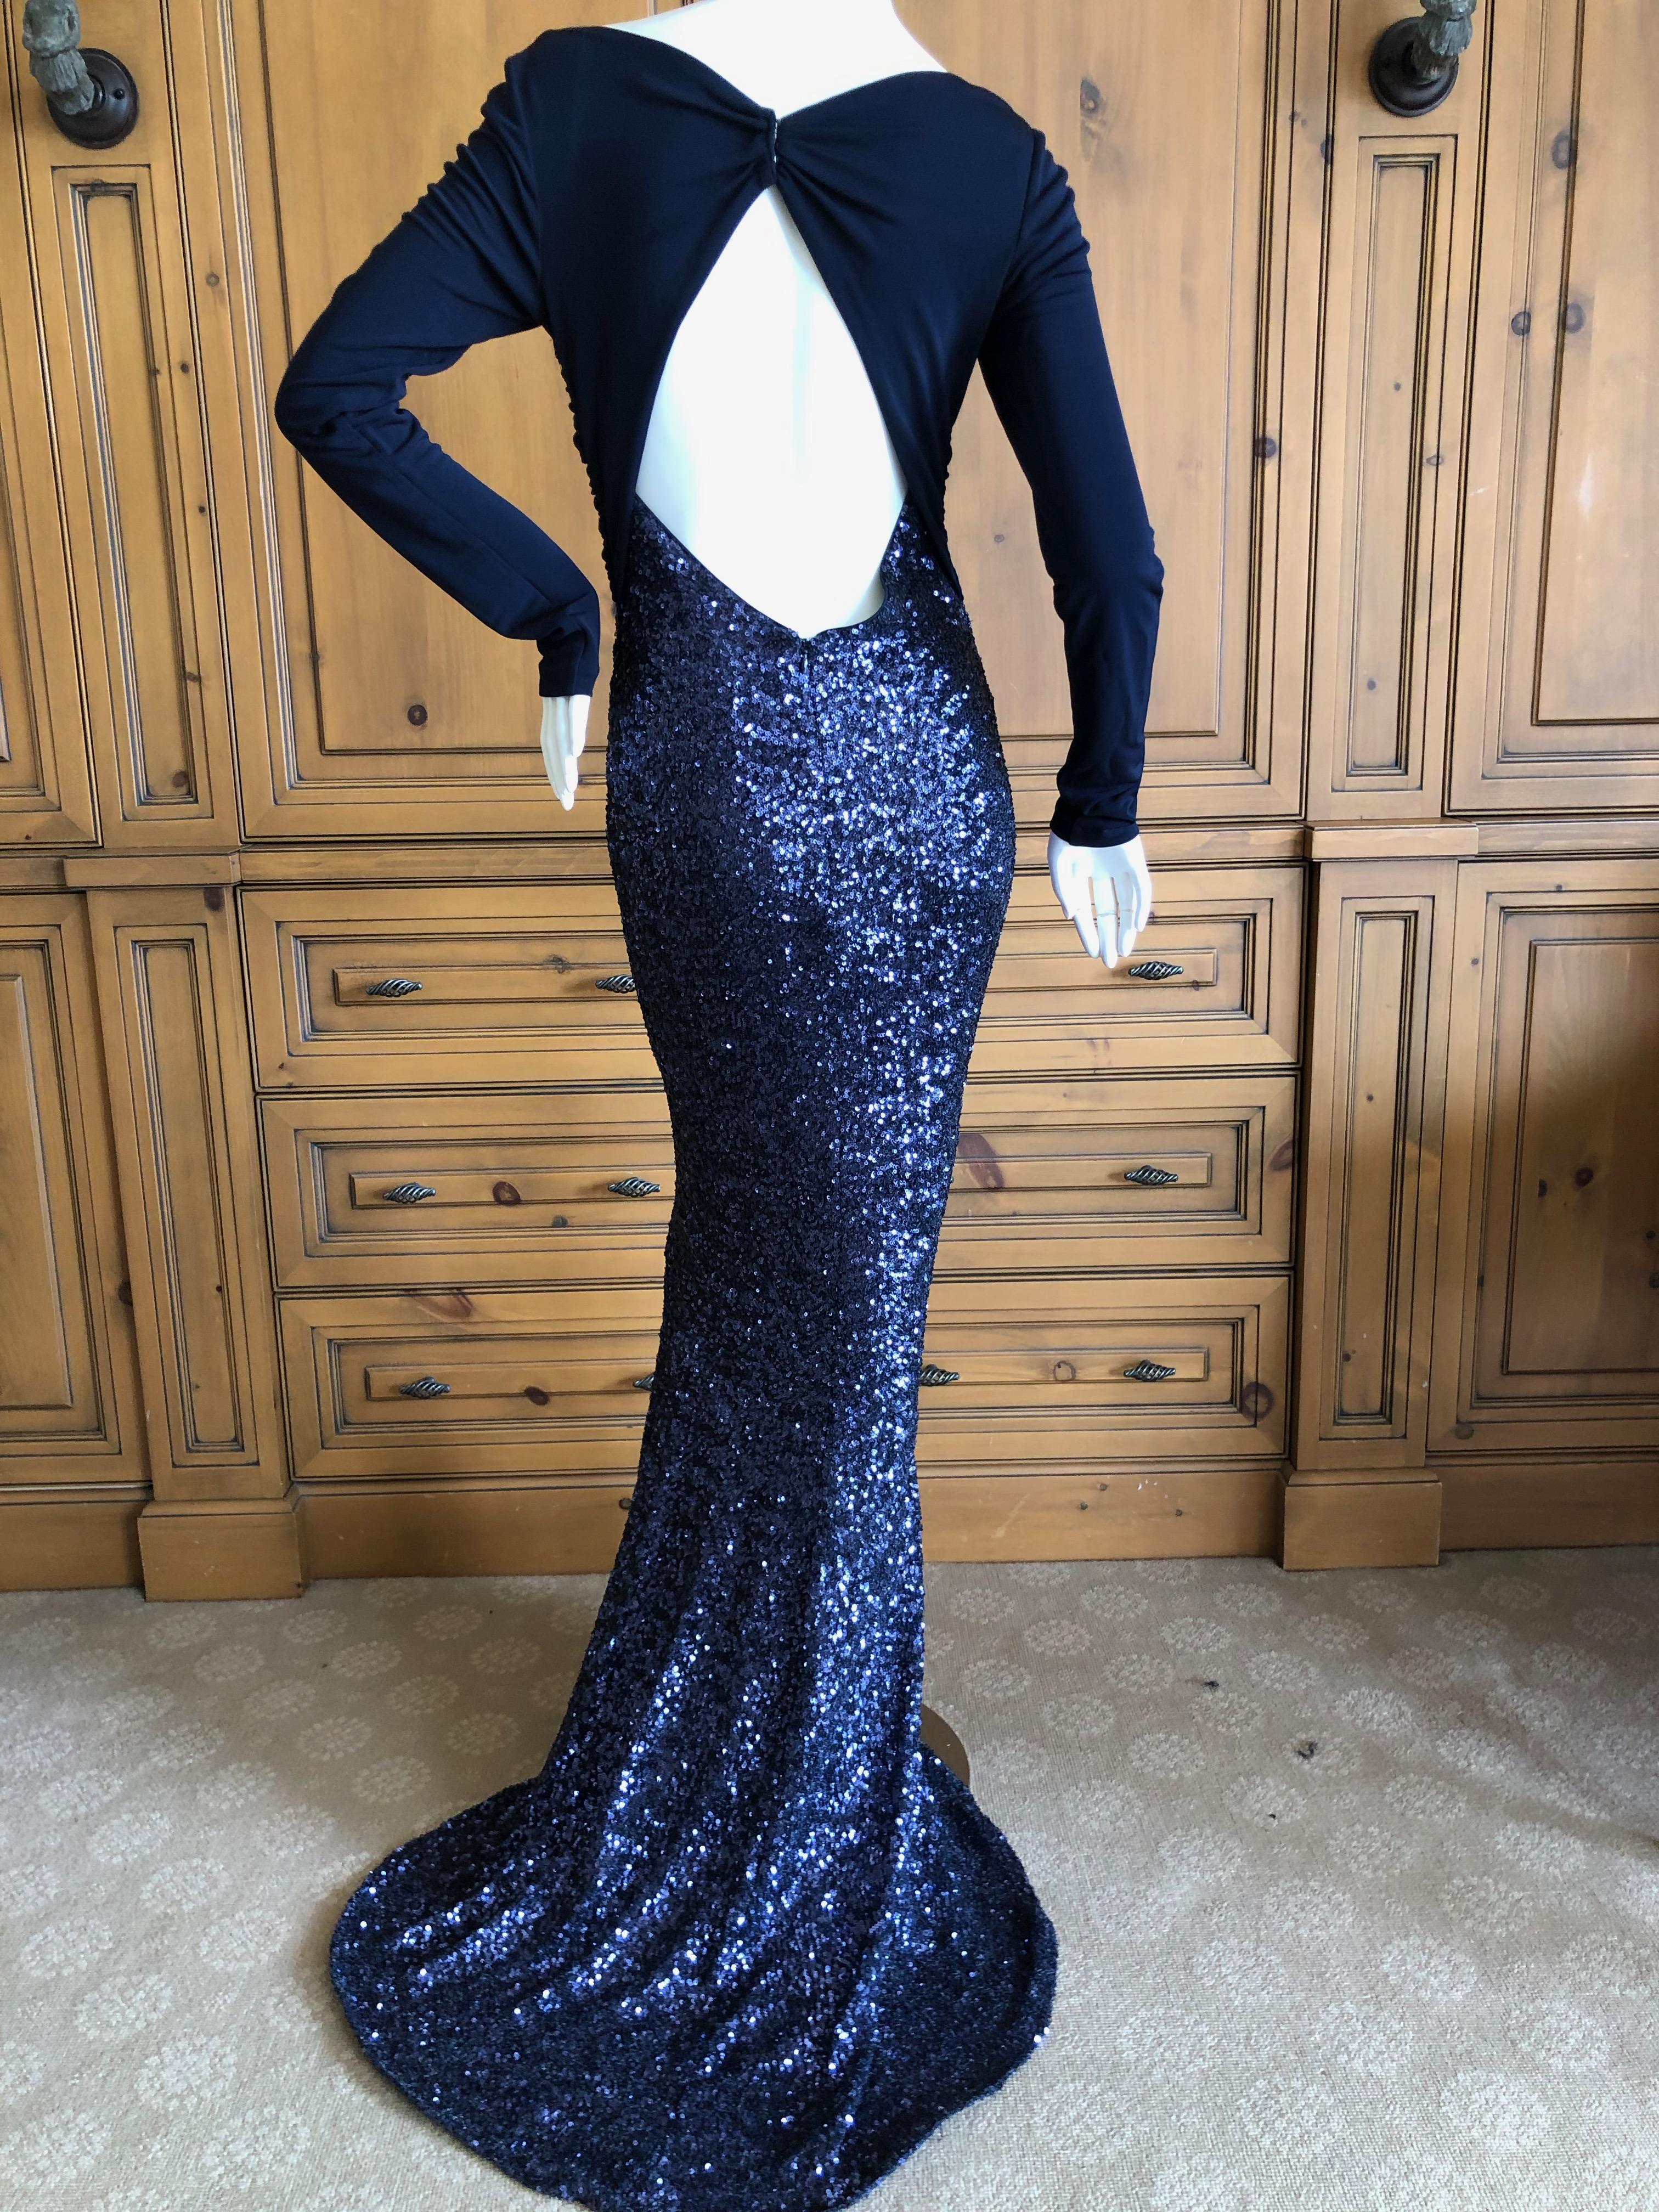 Dolce & Gabbana D&G Navy Blue Low Cut Silk Sequin Evening Gown w Keyhole Back 42 For Sale 2